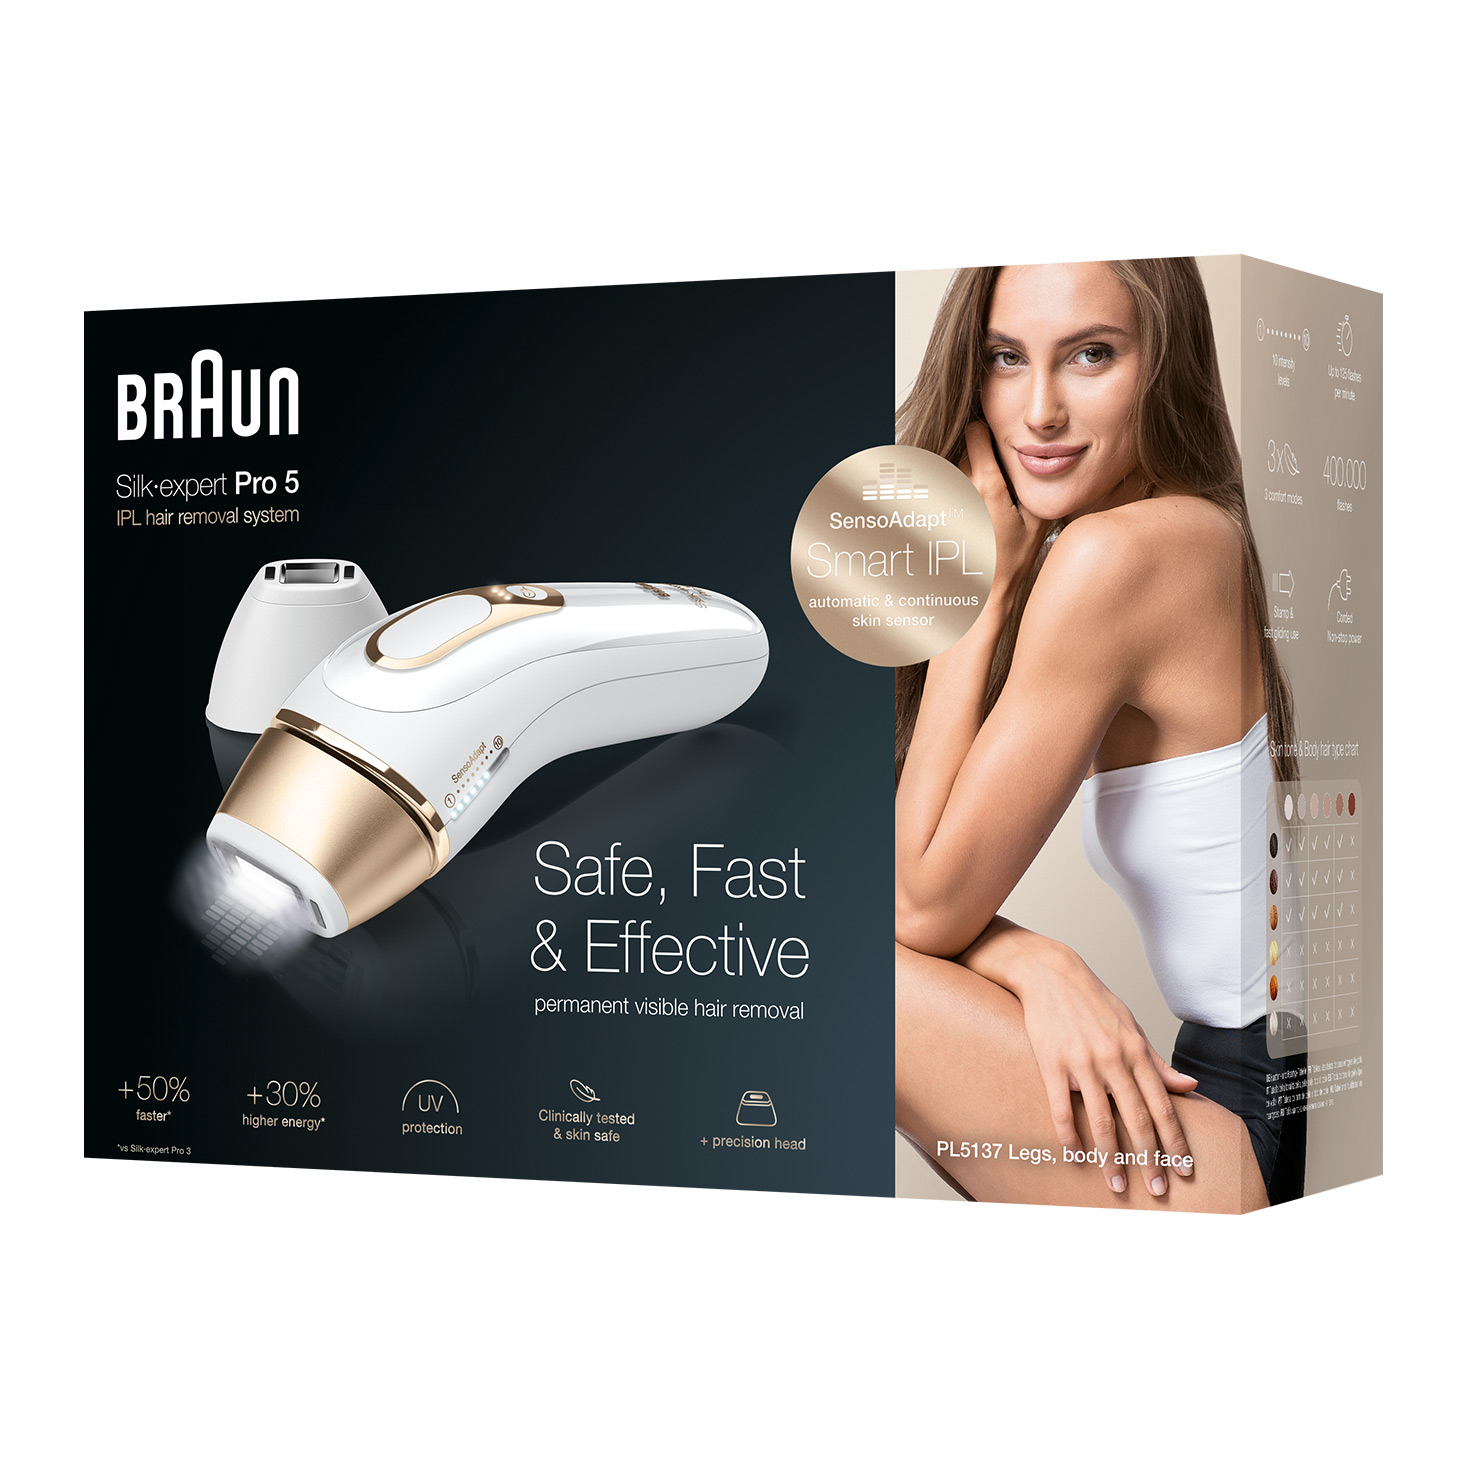 Braun Silk Expert Pro 5 Review Painfree hair removal at home